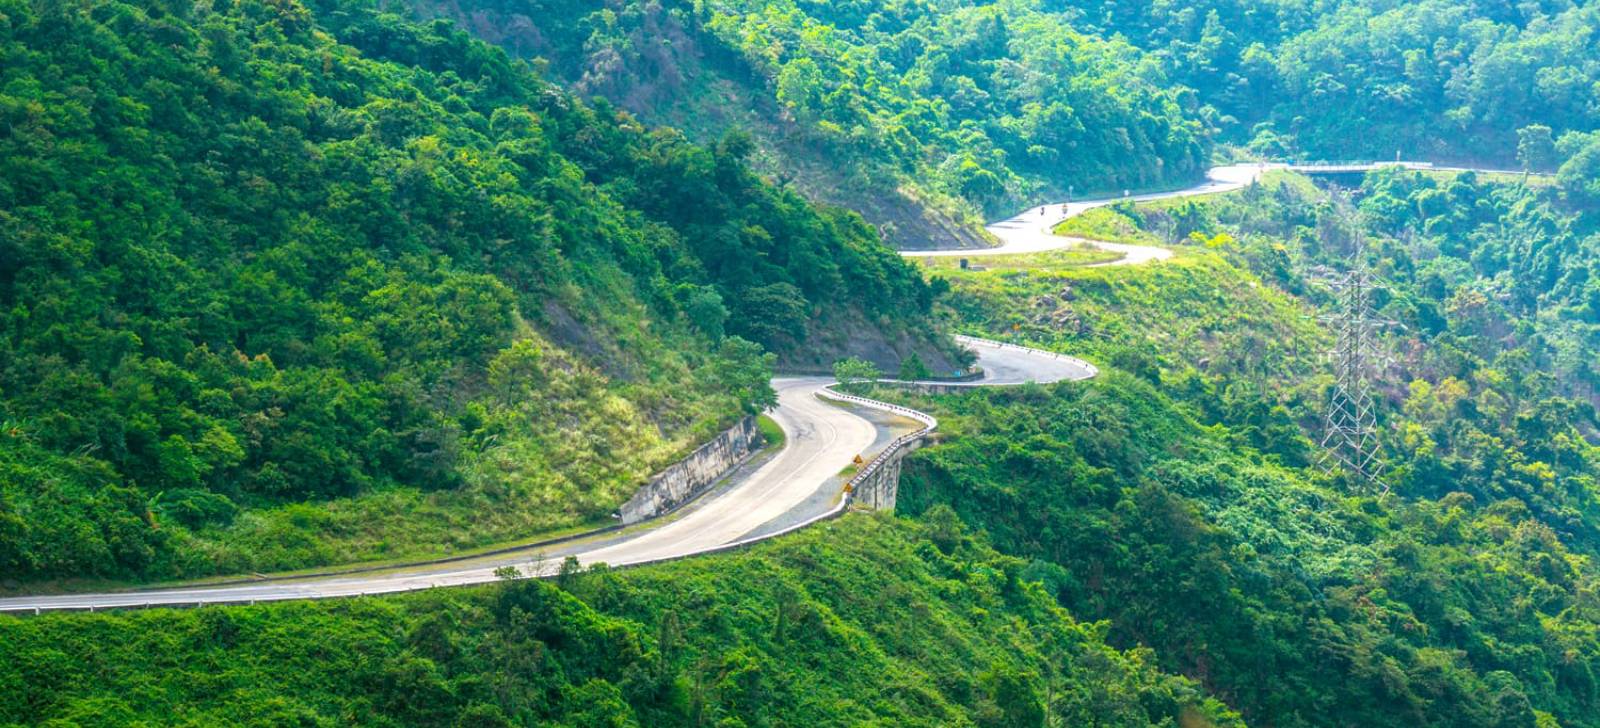 The 7 best road trips in Vietnam weave past mountains, jungles and beaches